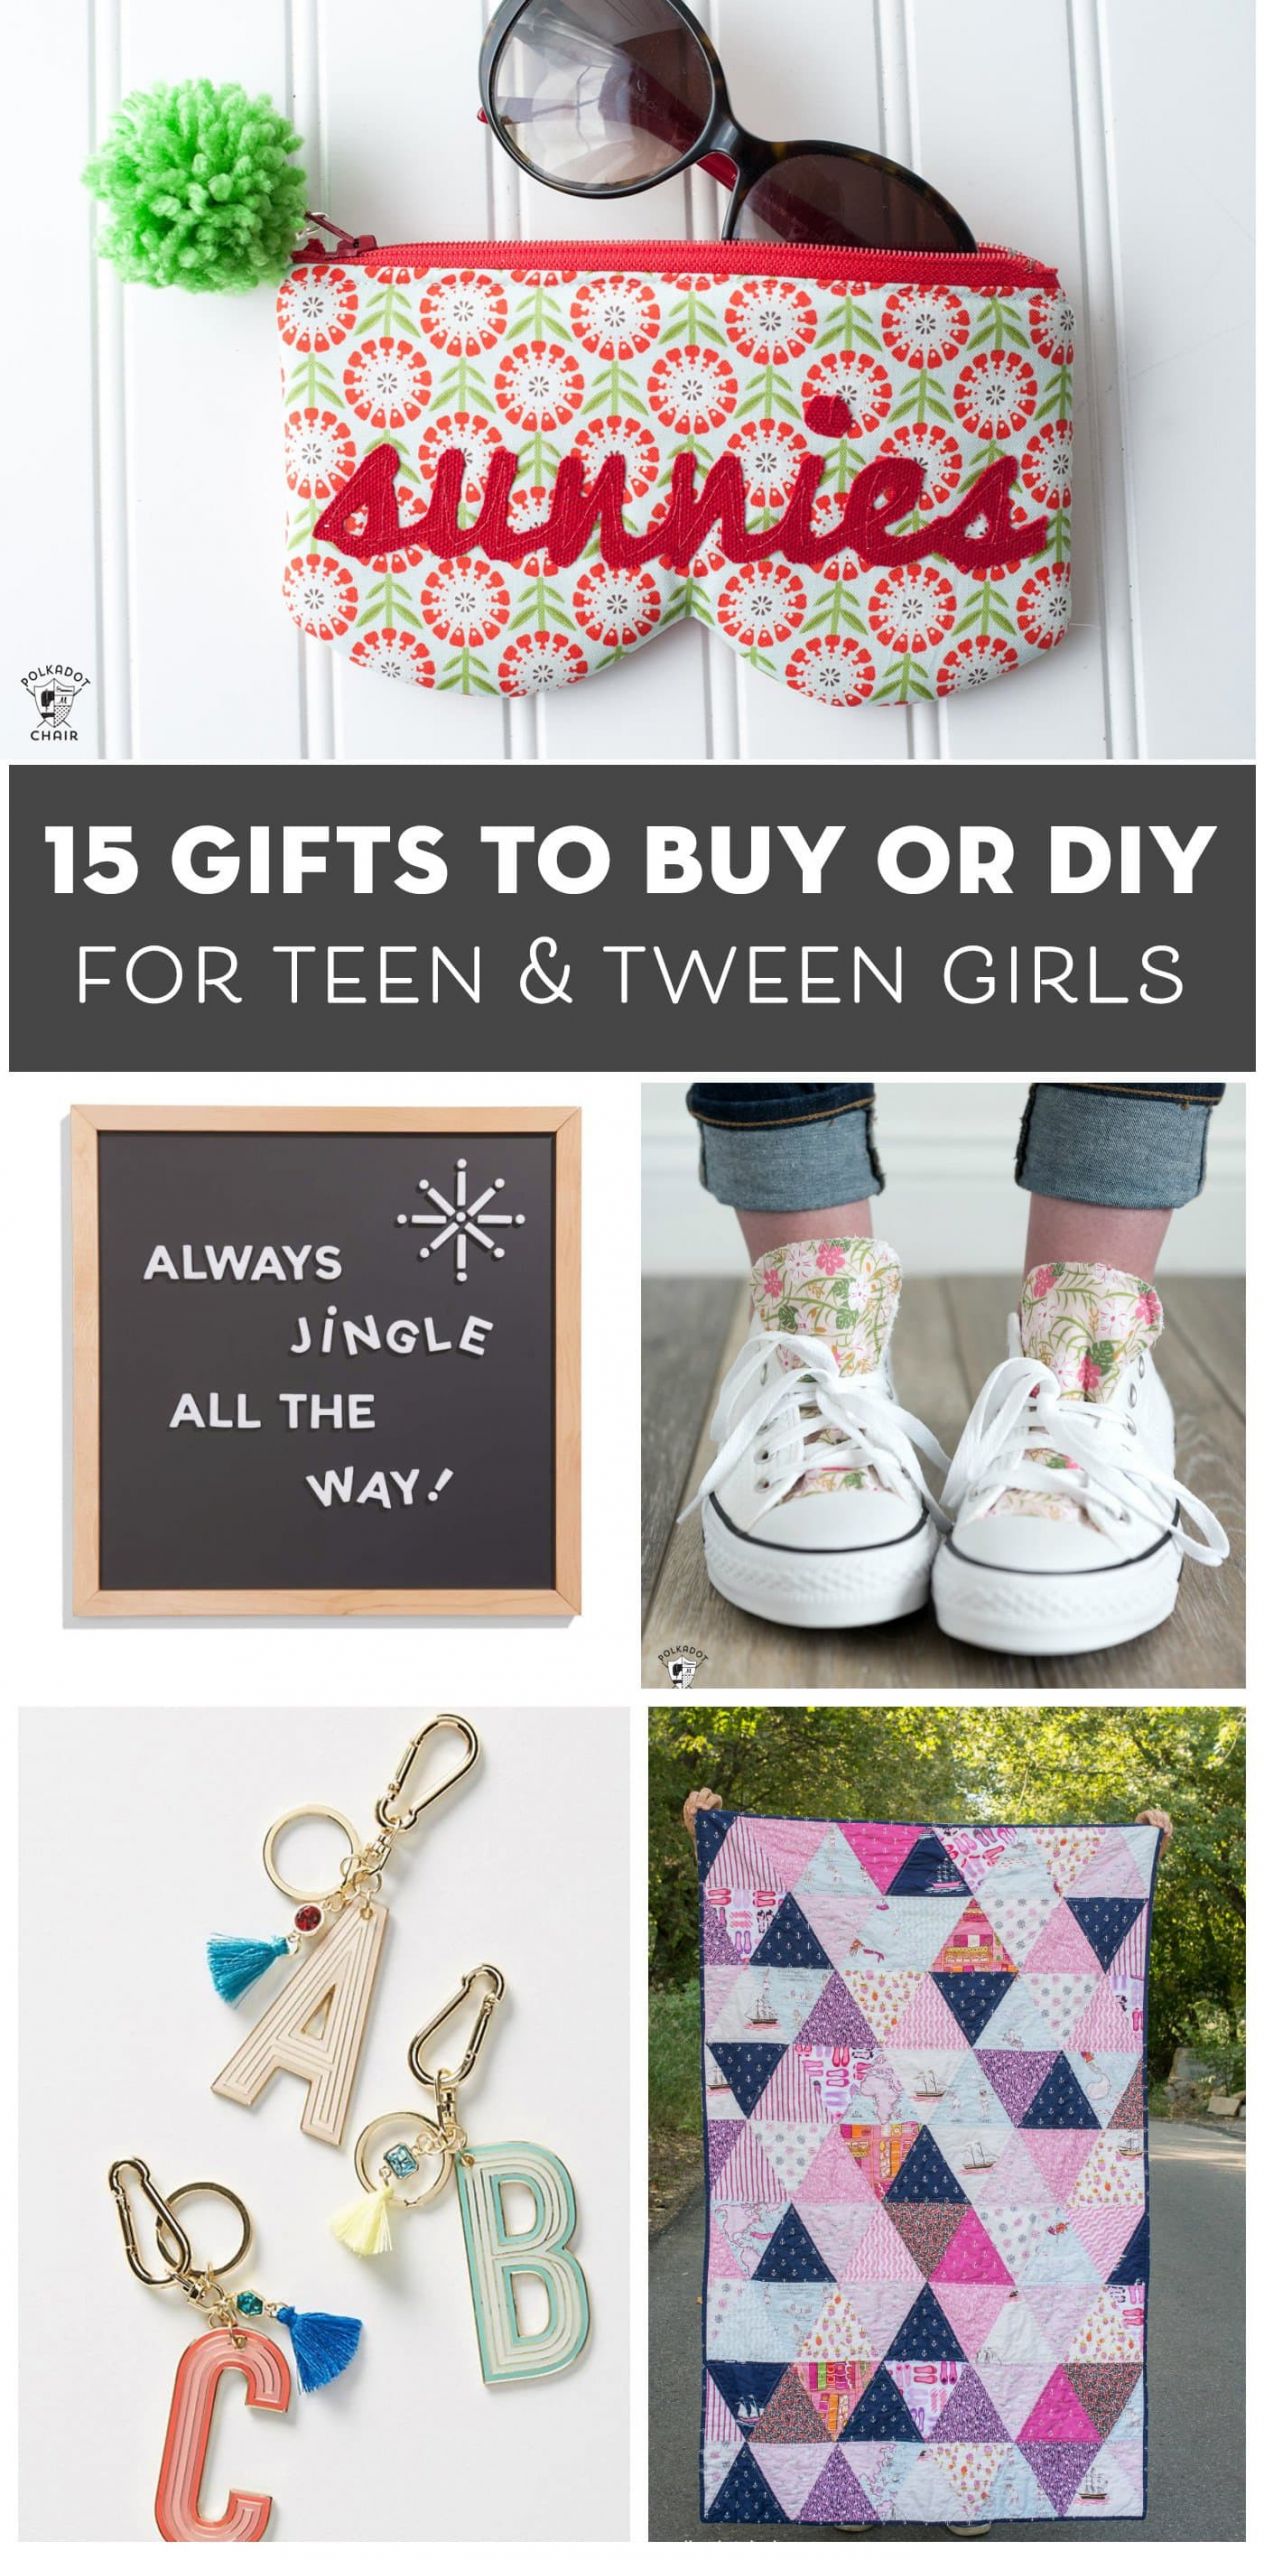 Gift Ideas For Tween Girls
 15 Gift Ideas for Teenage Girls That You Can DIY or Buy